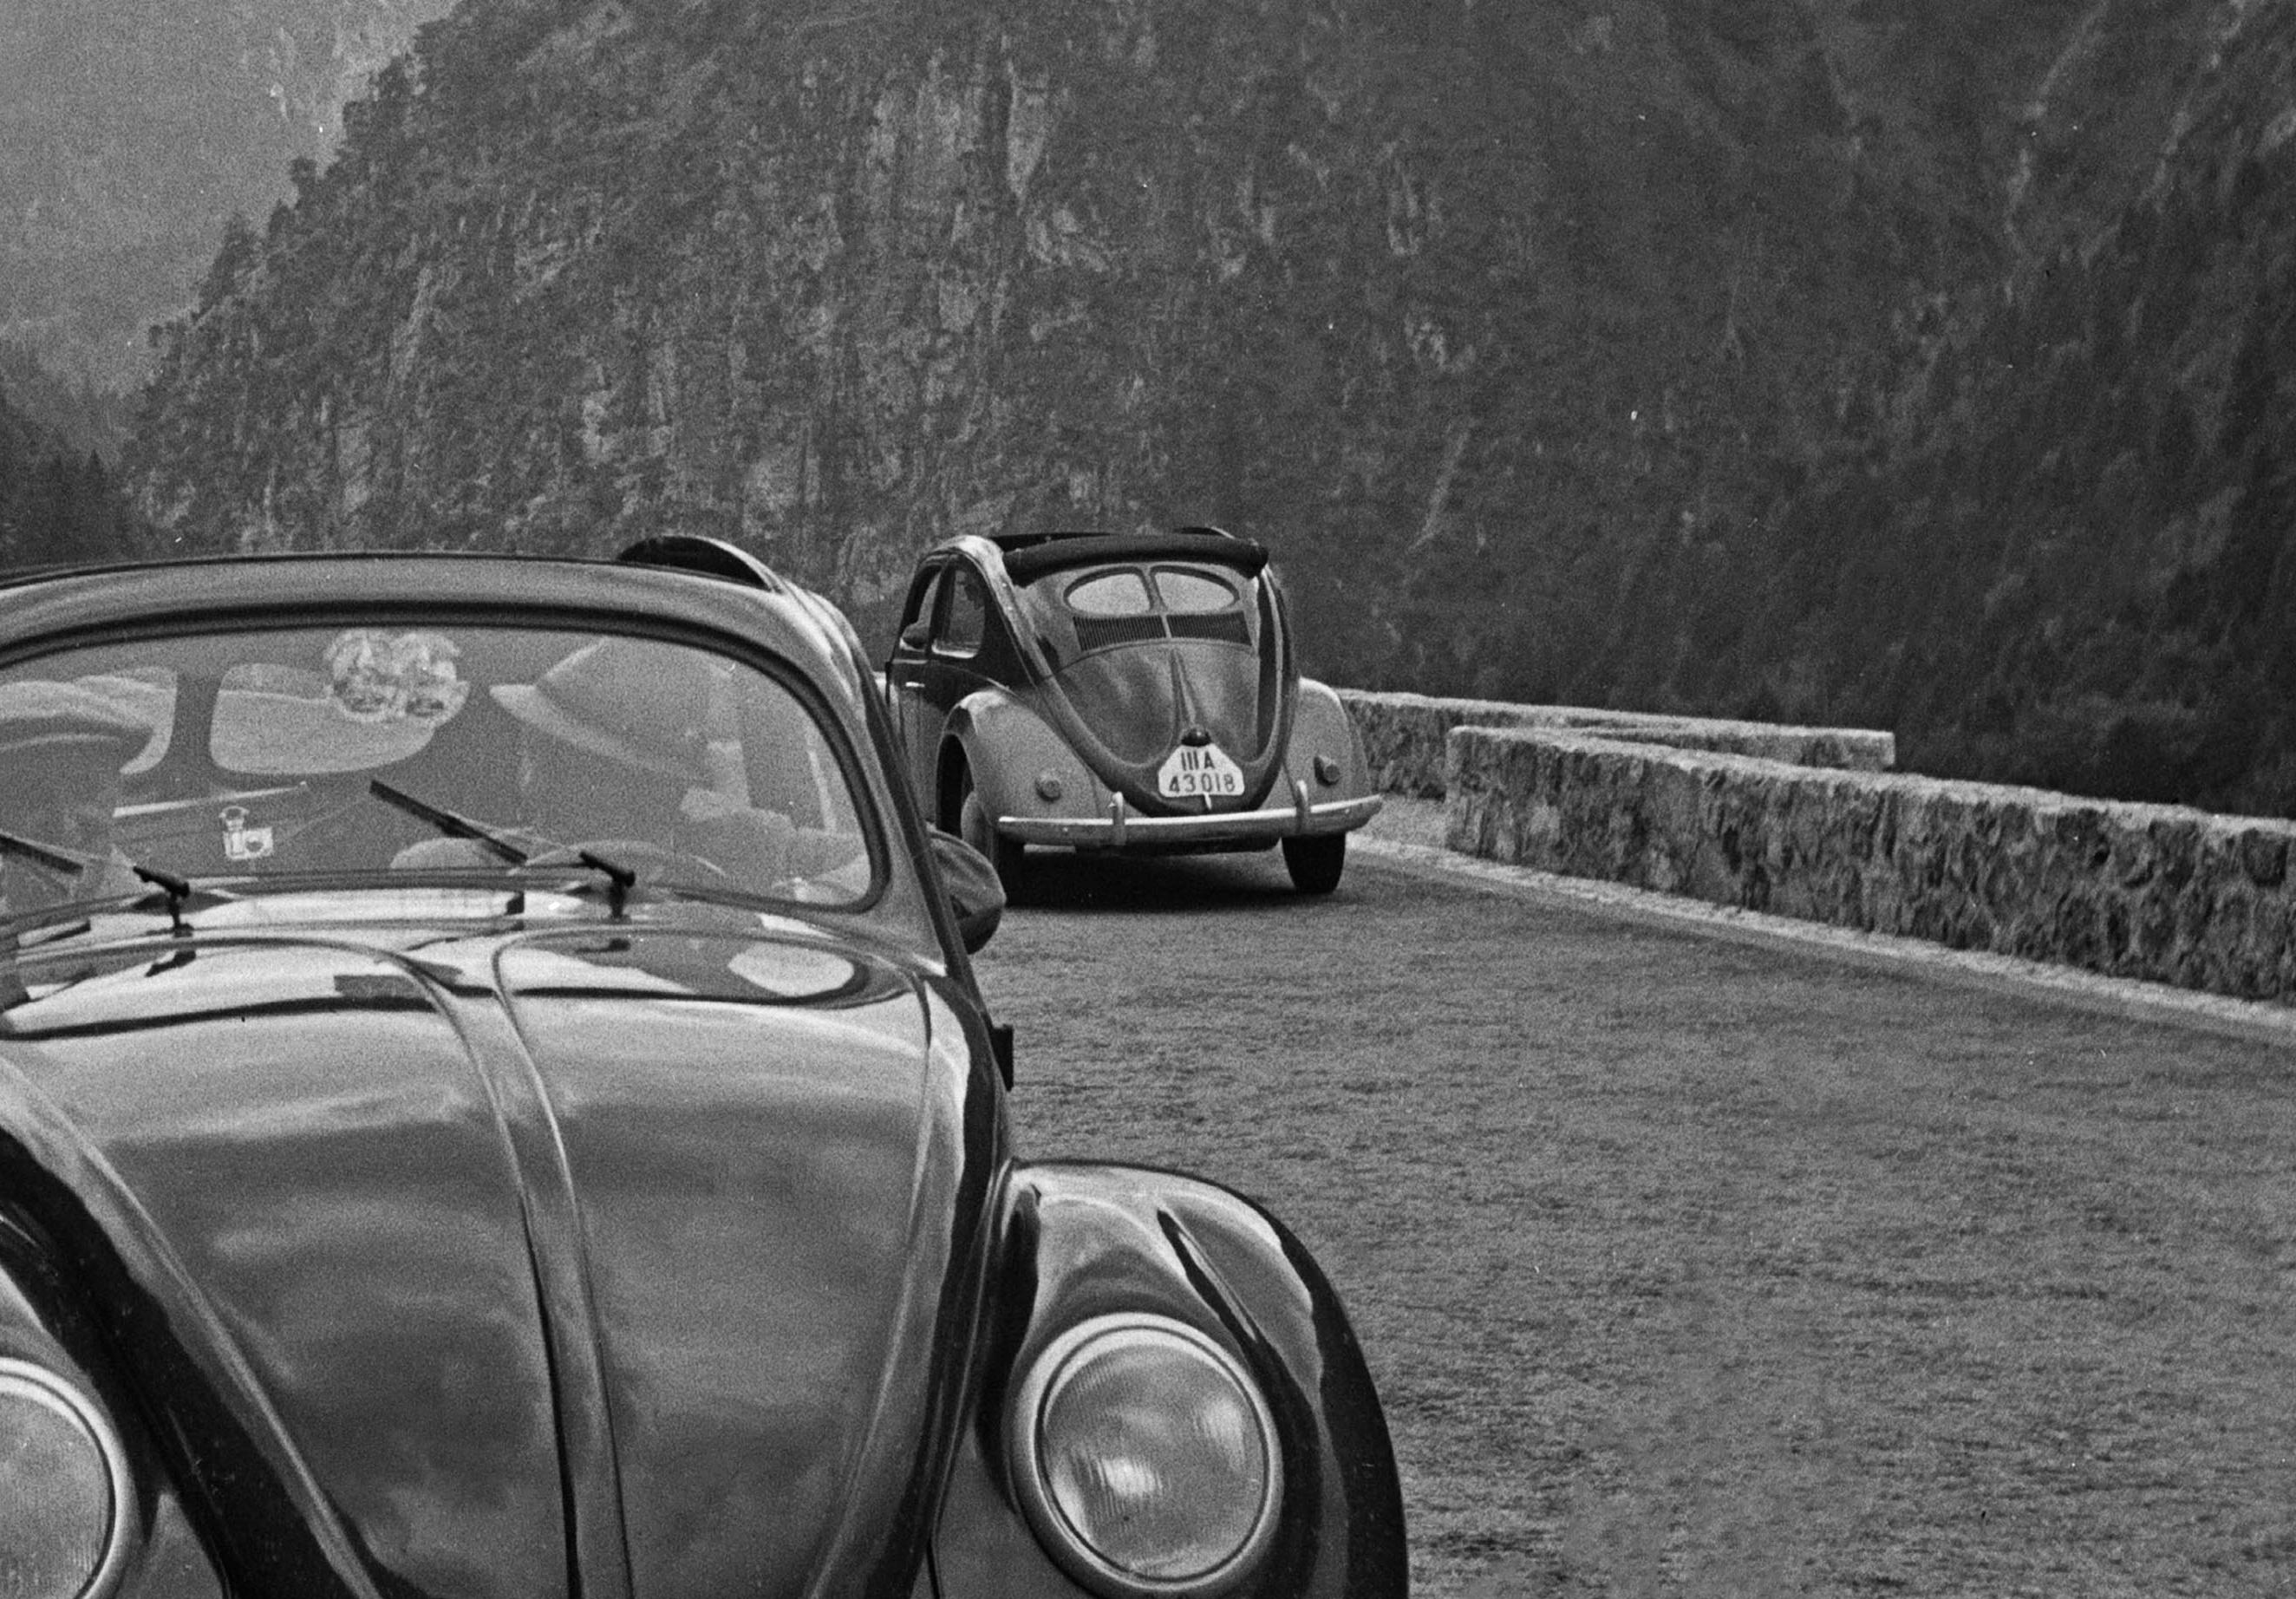 Travelling by Volkswagen beetle through mountains, Germany 1939 Printed Later  - Photograph by Karl Heinrich Lämmel